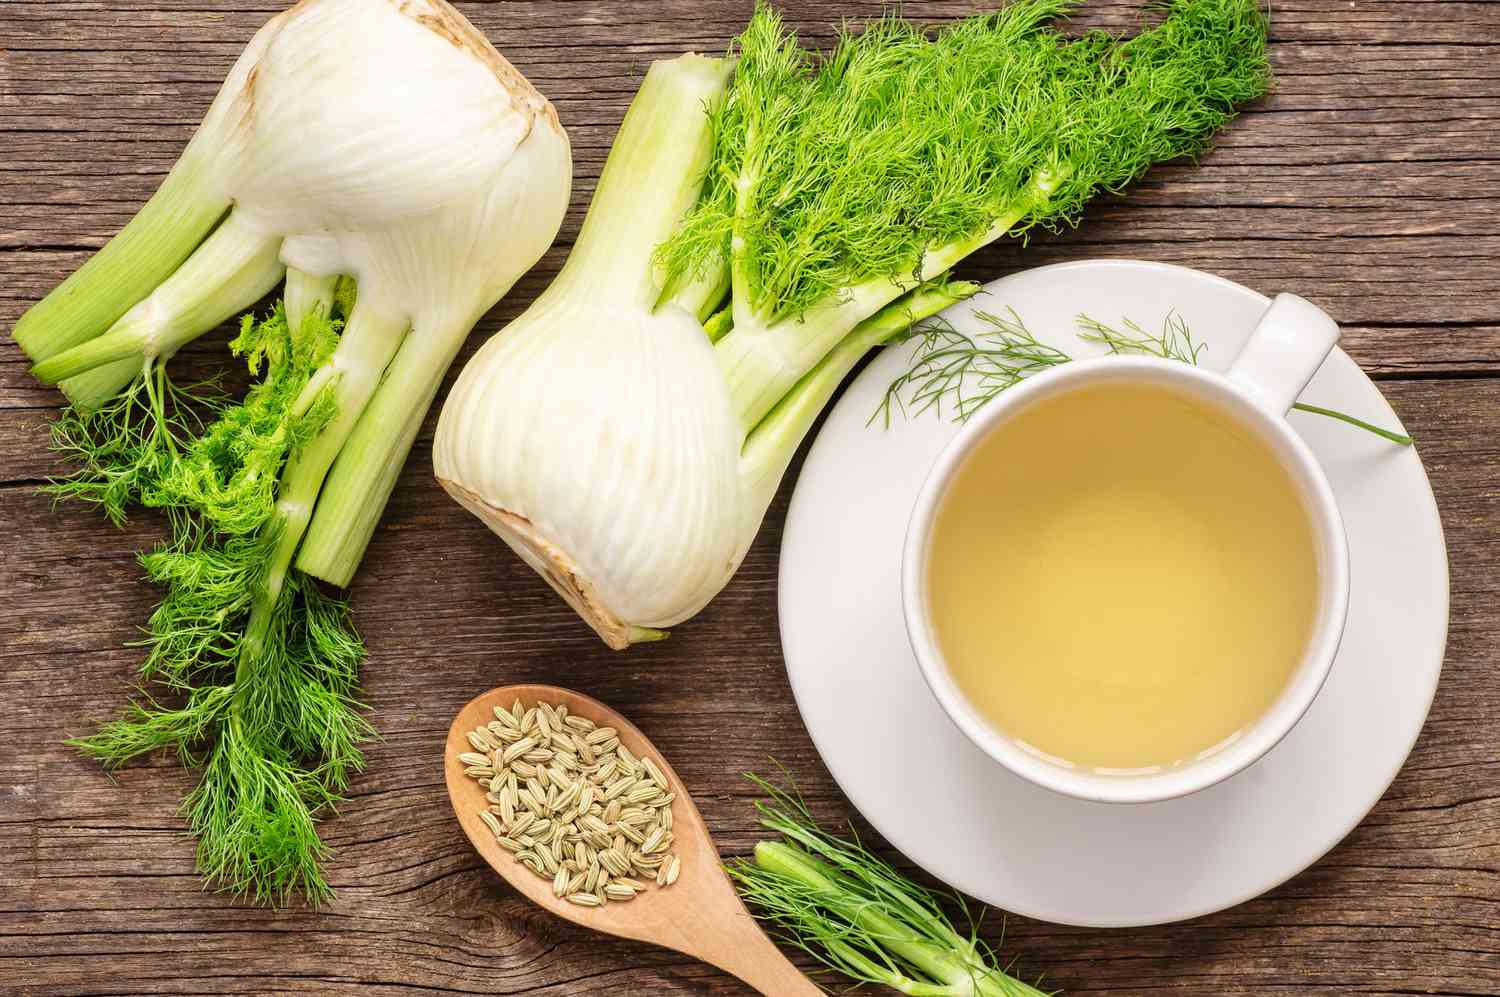 Fennel tea health benefits: Herbal infusion fennel tea in glass cup or mug with dried fennel